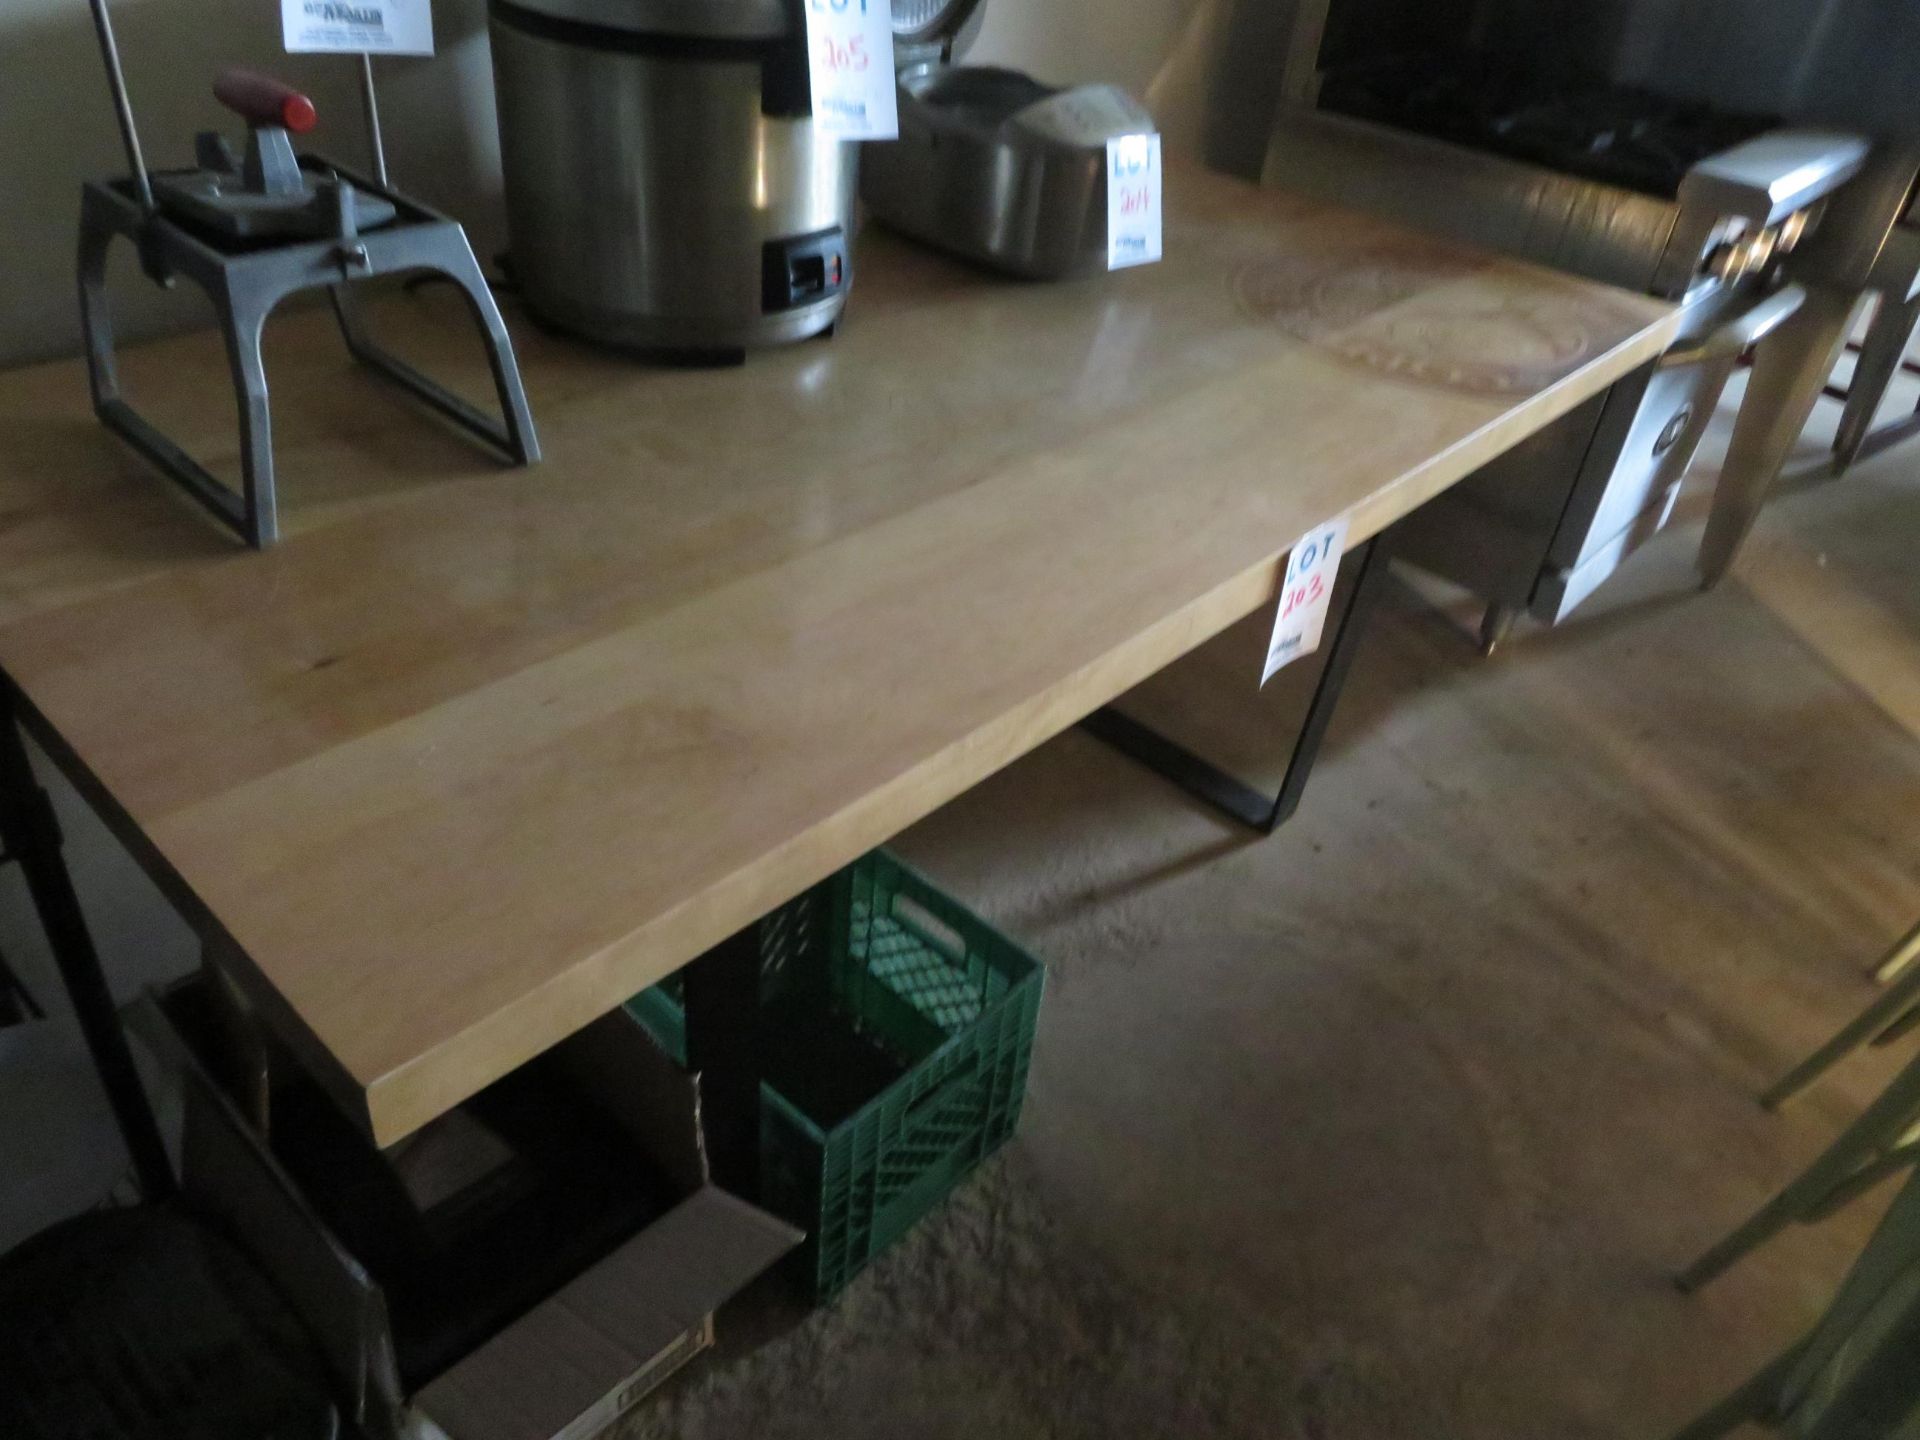 Table with wood top approx. 72"w x 36"